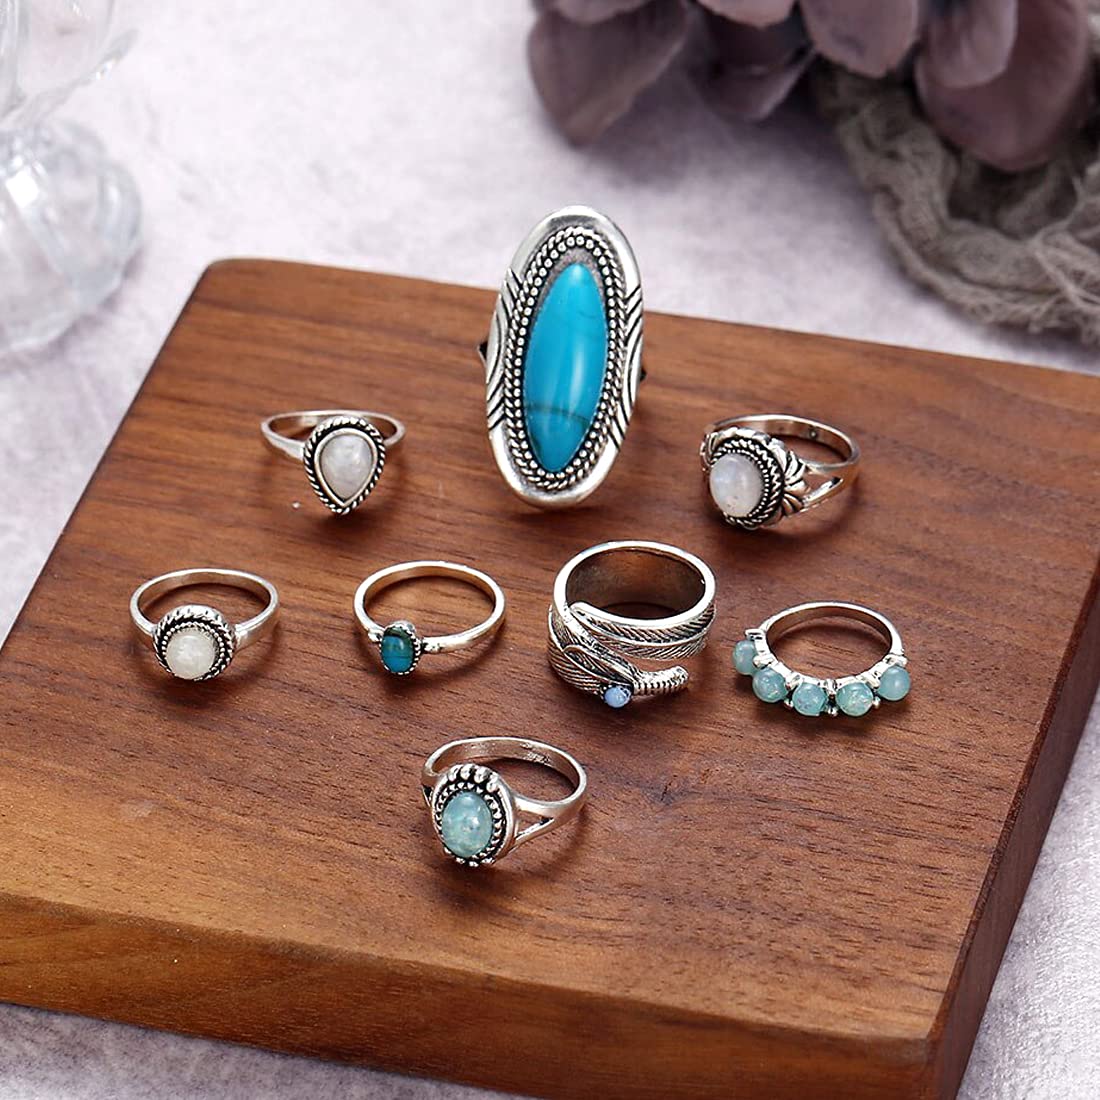 Yellow Chimes Rings for Women 8 Pcs Rings Set Turquoise Stone Vintage Style Midi Finger Silver Oxidised Knuckle Rings Set for Women and Girls.